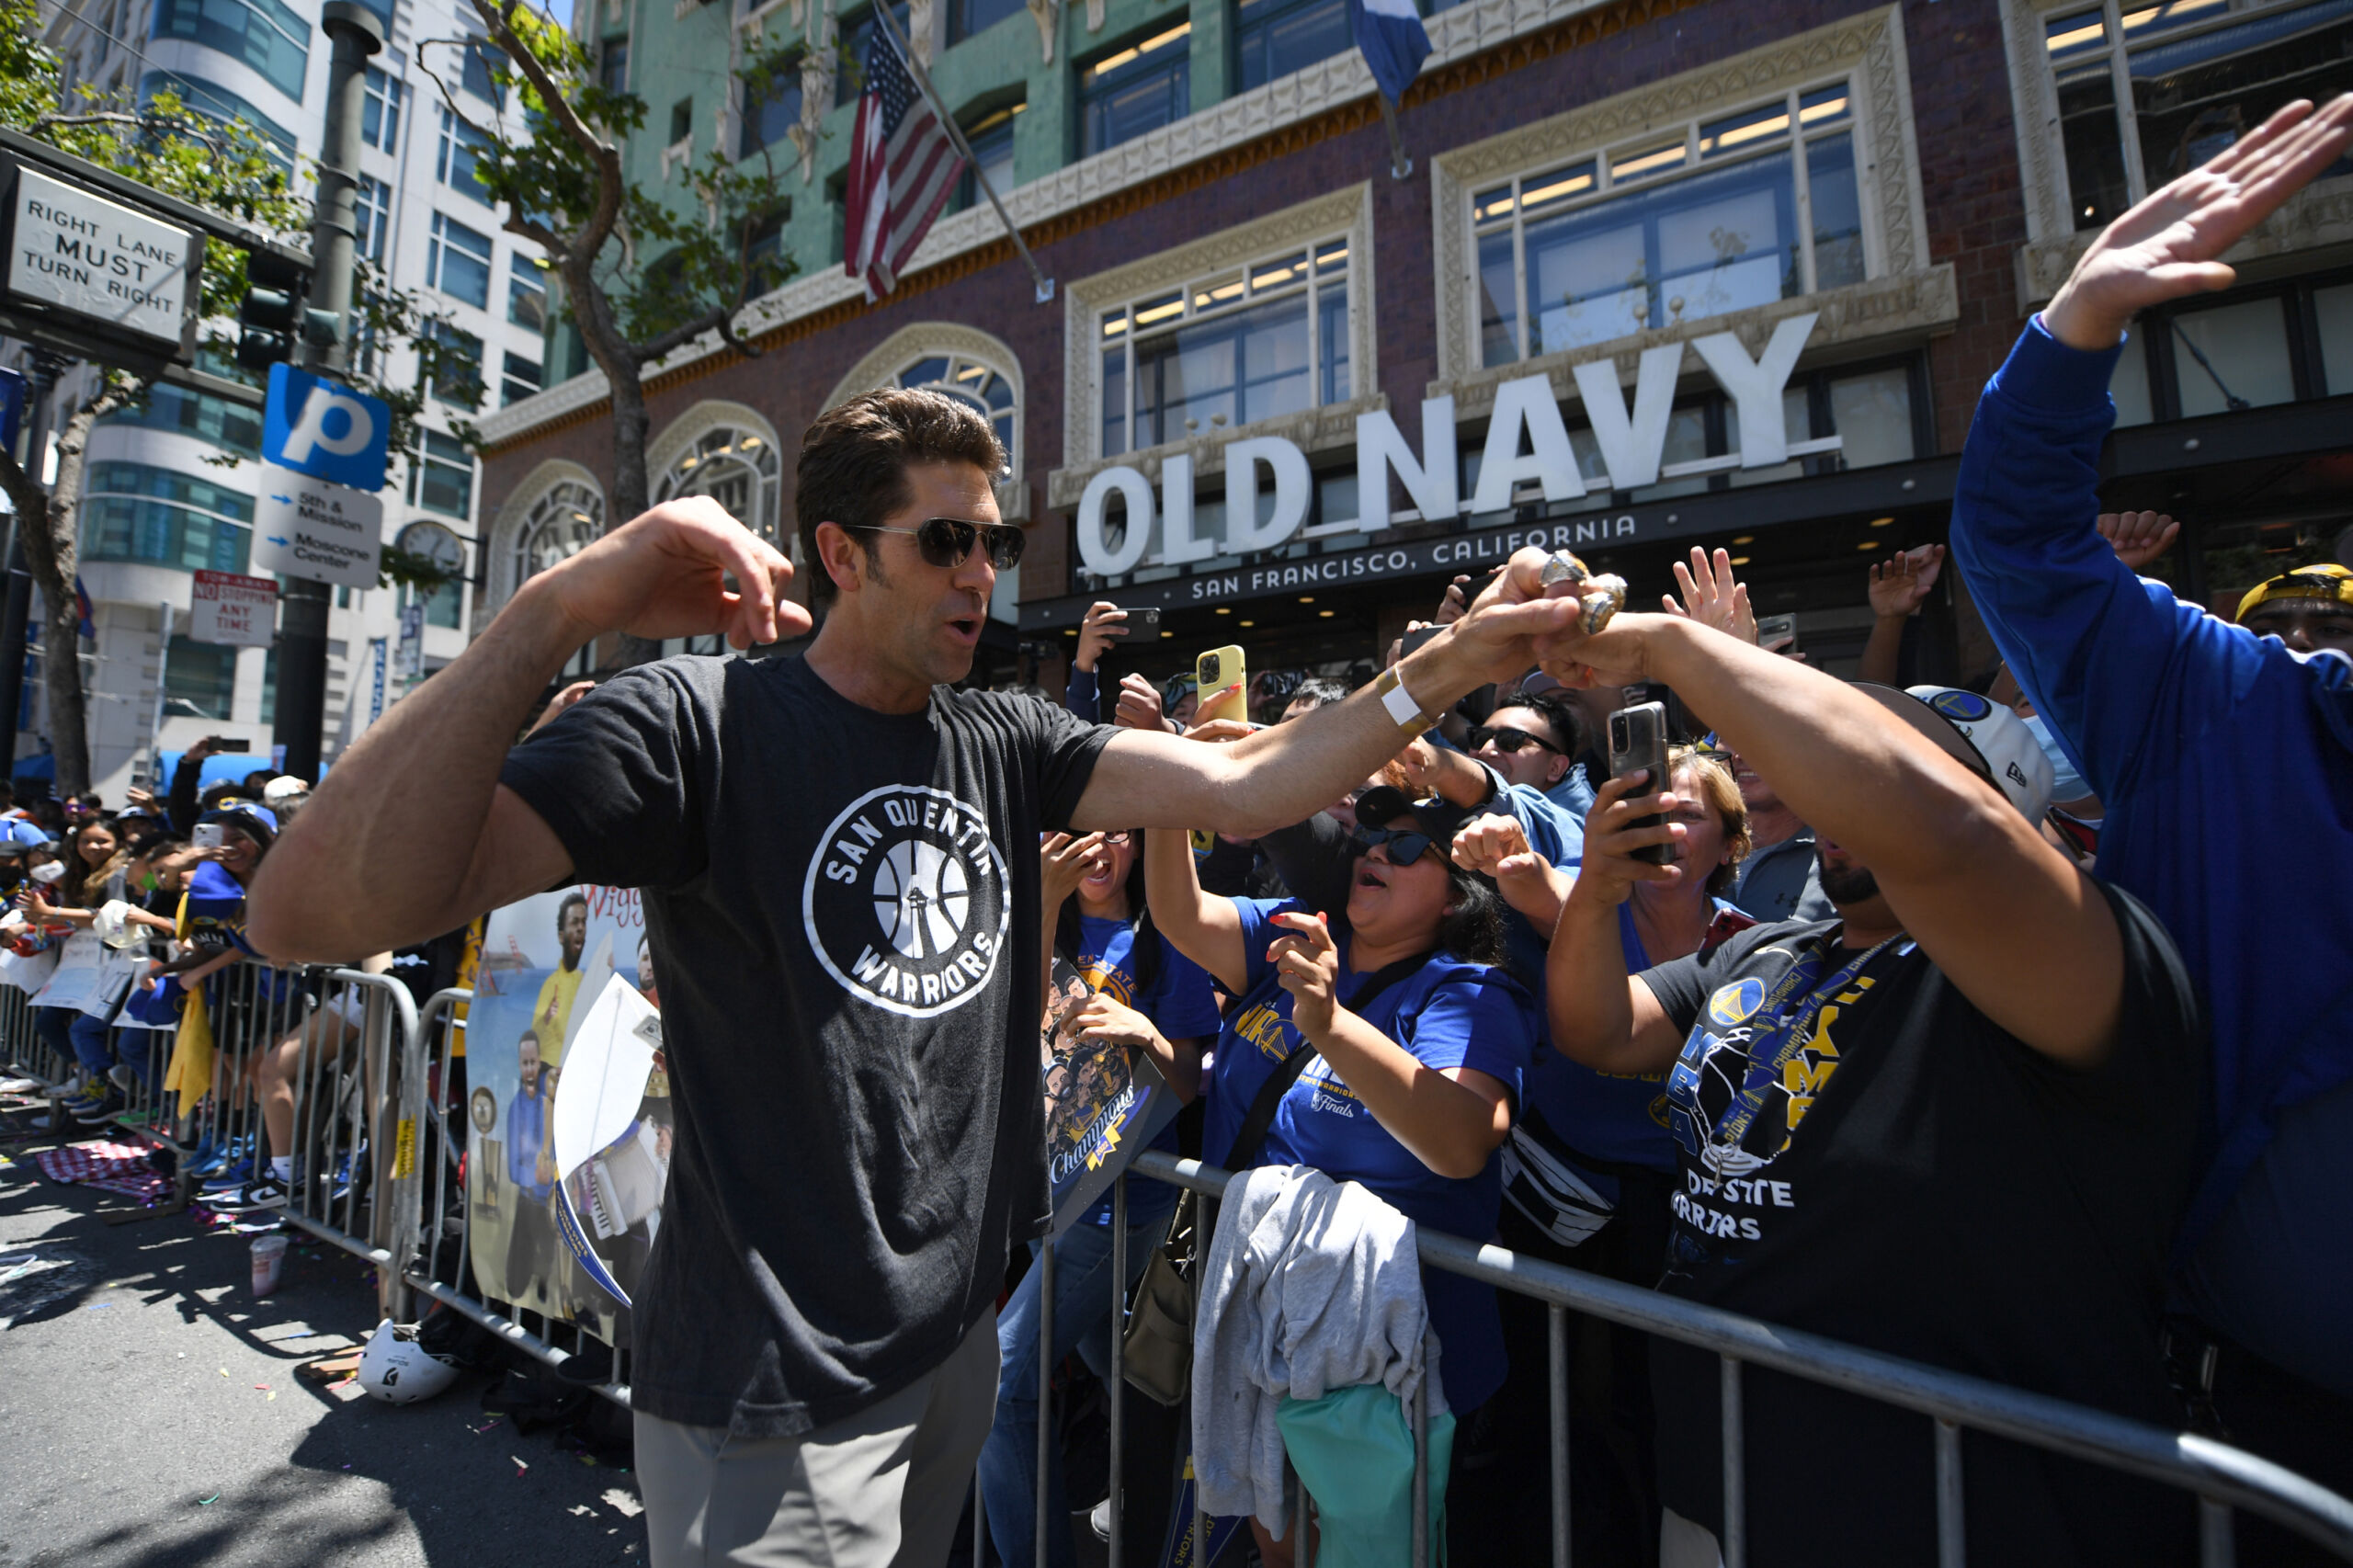 Bob Myers weighs in on Klay Thompson's negotiation with Warriors